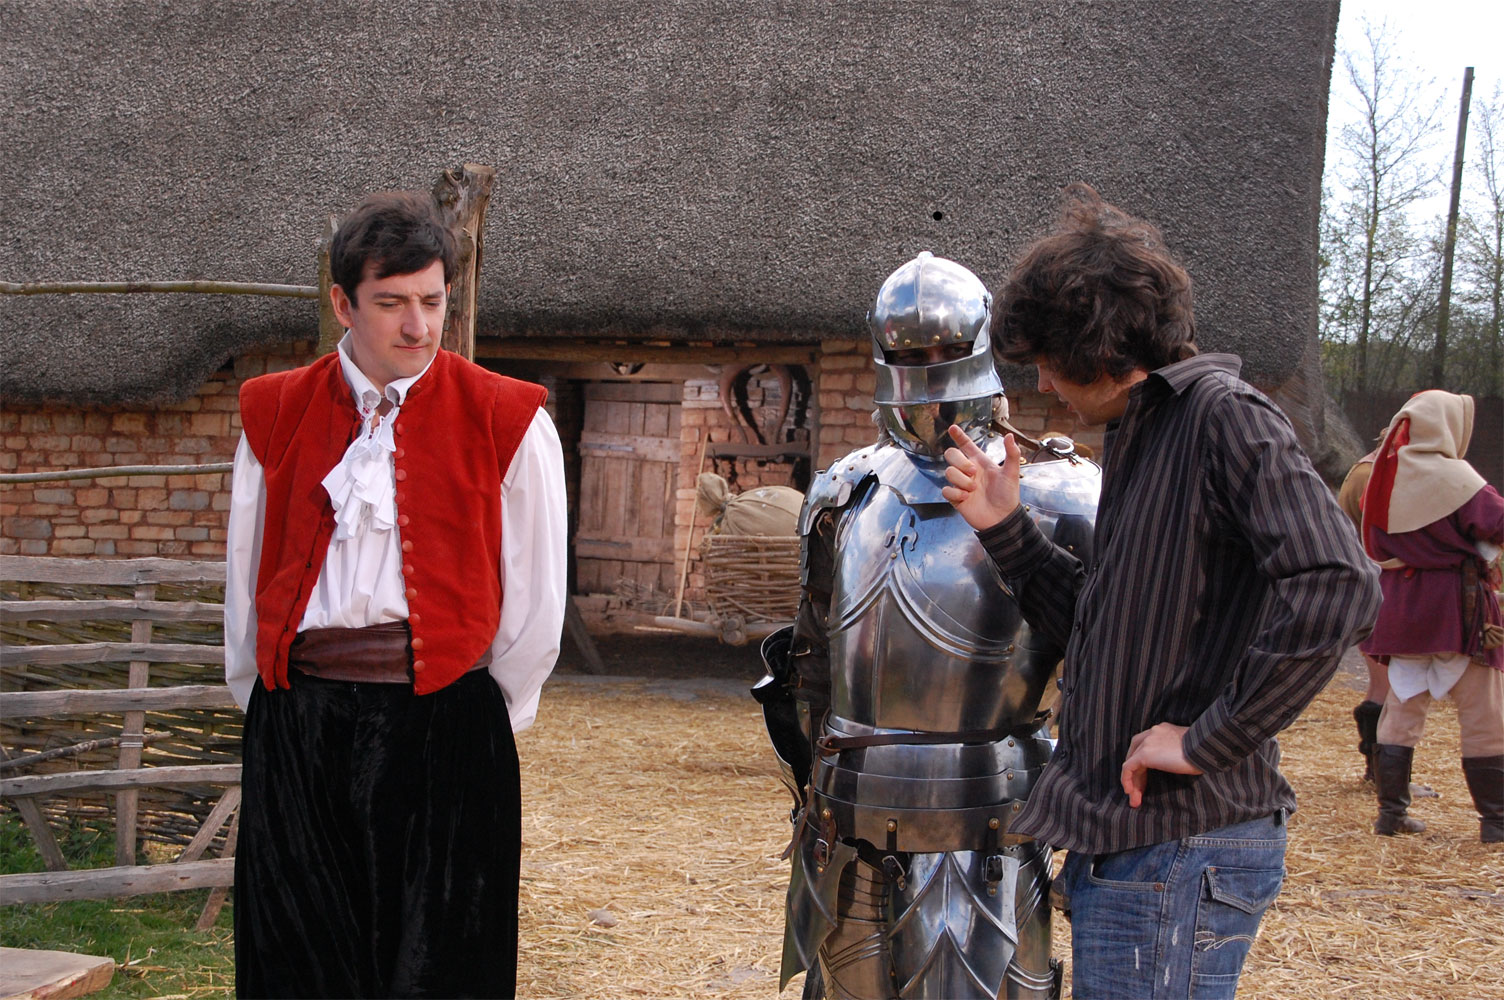 Directing medieval comedy commercials